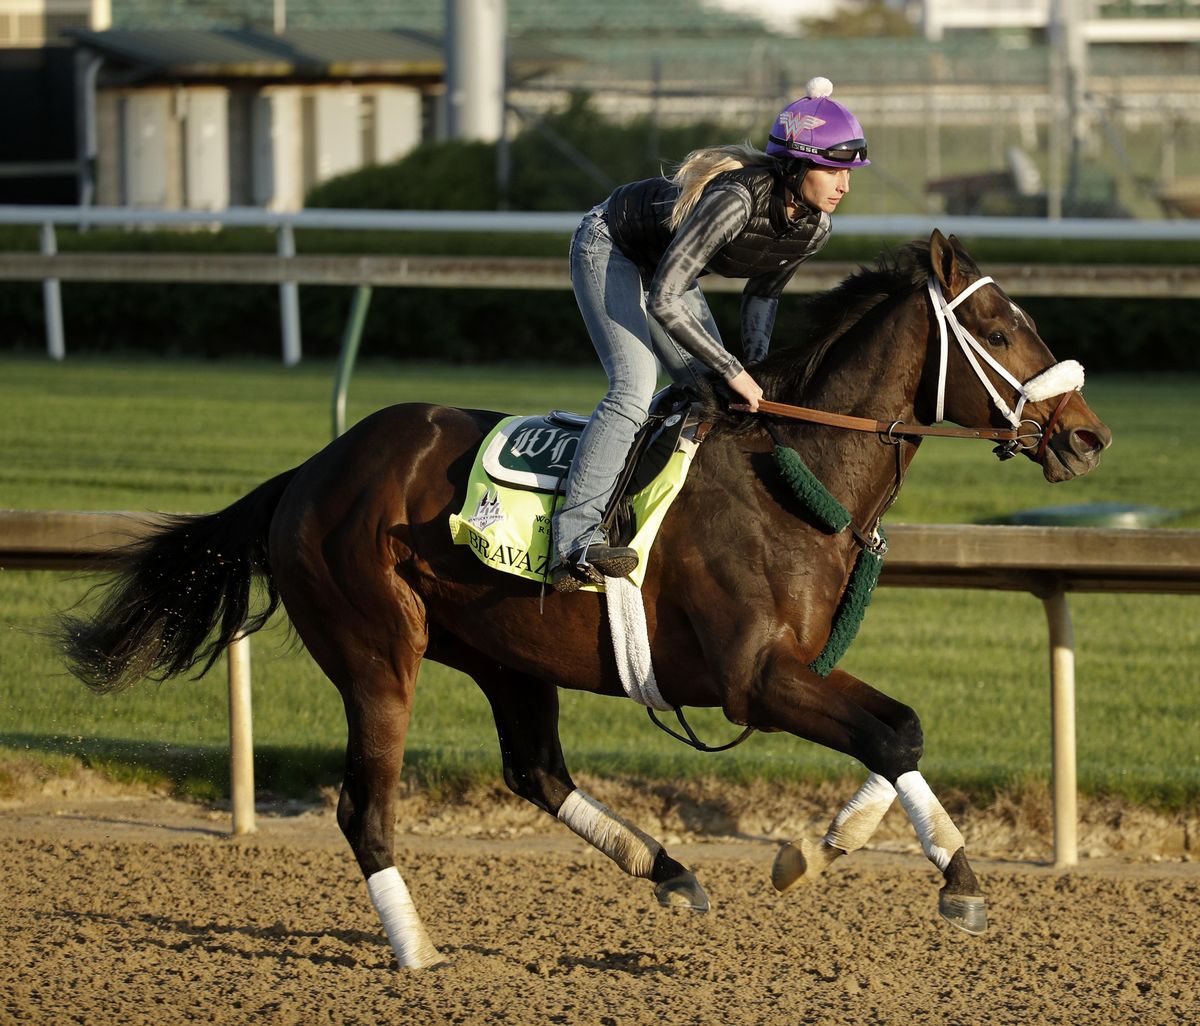 In this May 1, 2018, file photo, Kentucky Derby hopeful Bravazo runs during a morning workout at Churchill Downs in Louisville, Ky. Hall of Fame trainer D. Wayne Lukas brings back Bravazo, who finished sixth in the Derby, along with Sporting Chance, to take on Derby winner Justify on Saturday in the Preakness. (Charlie Riedel / Associated Press)